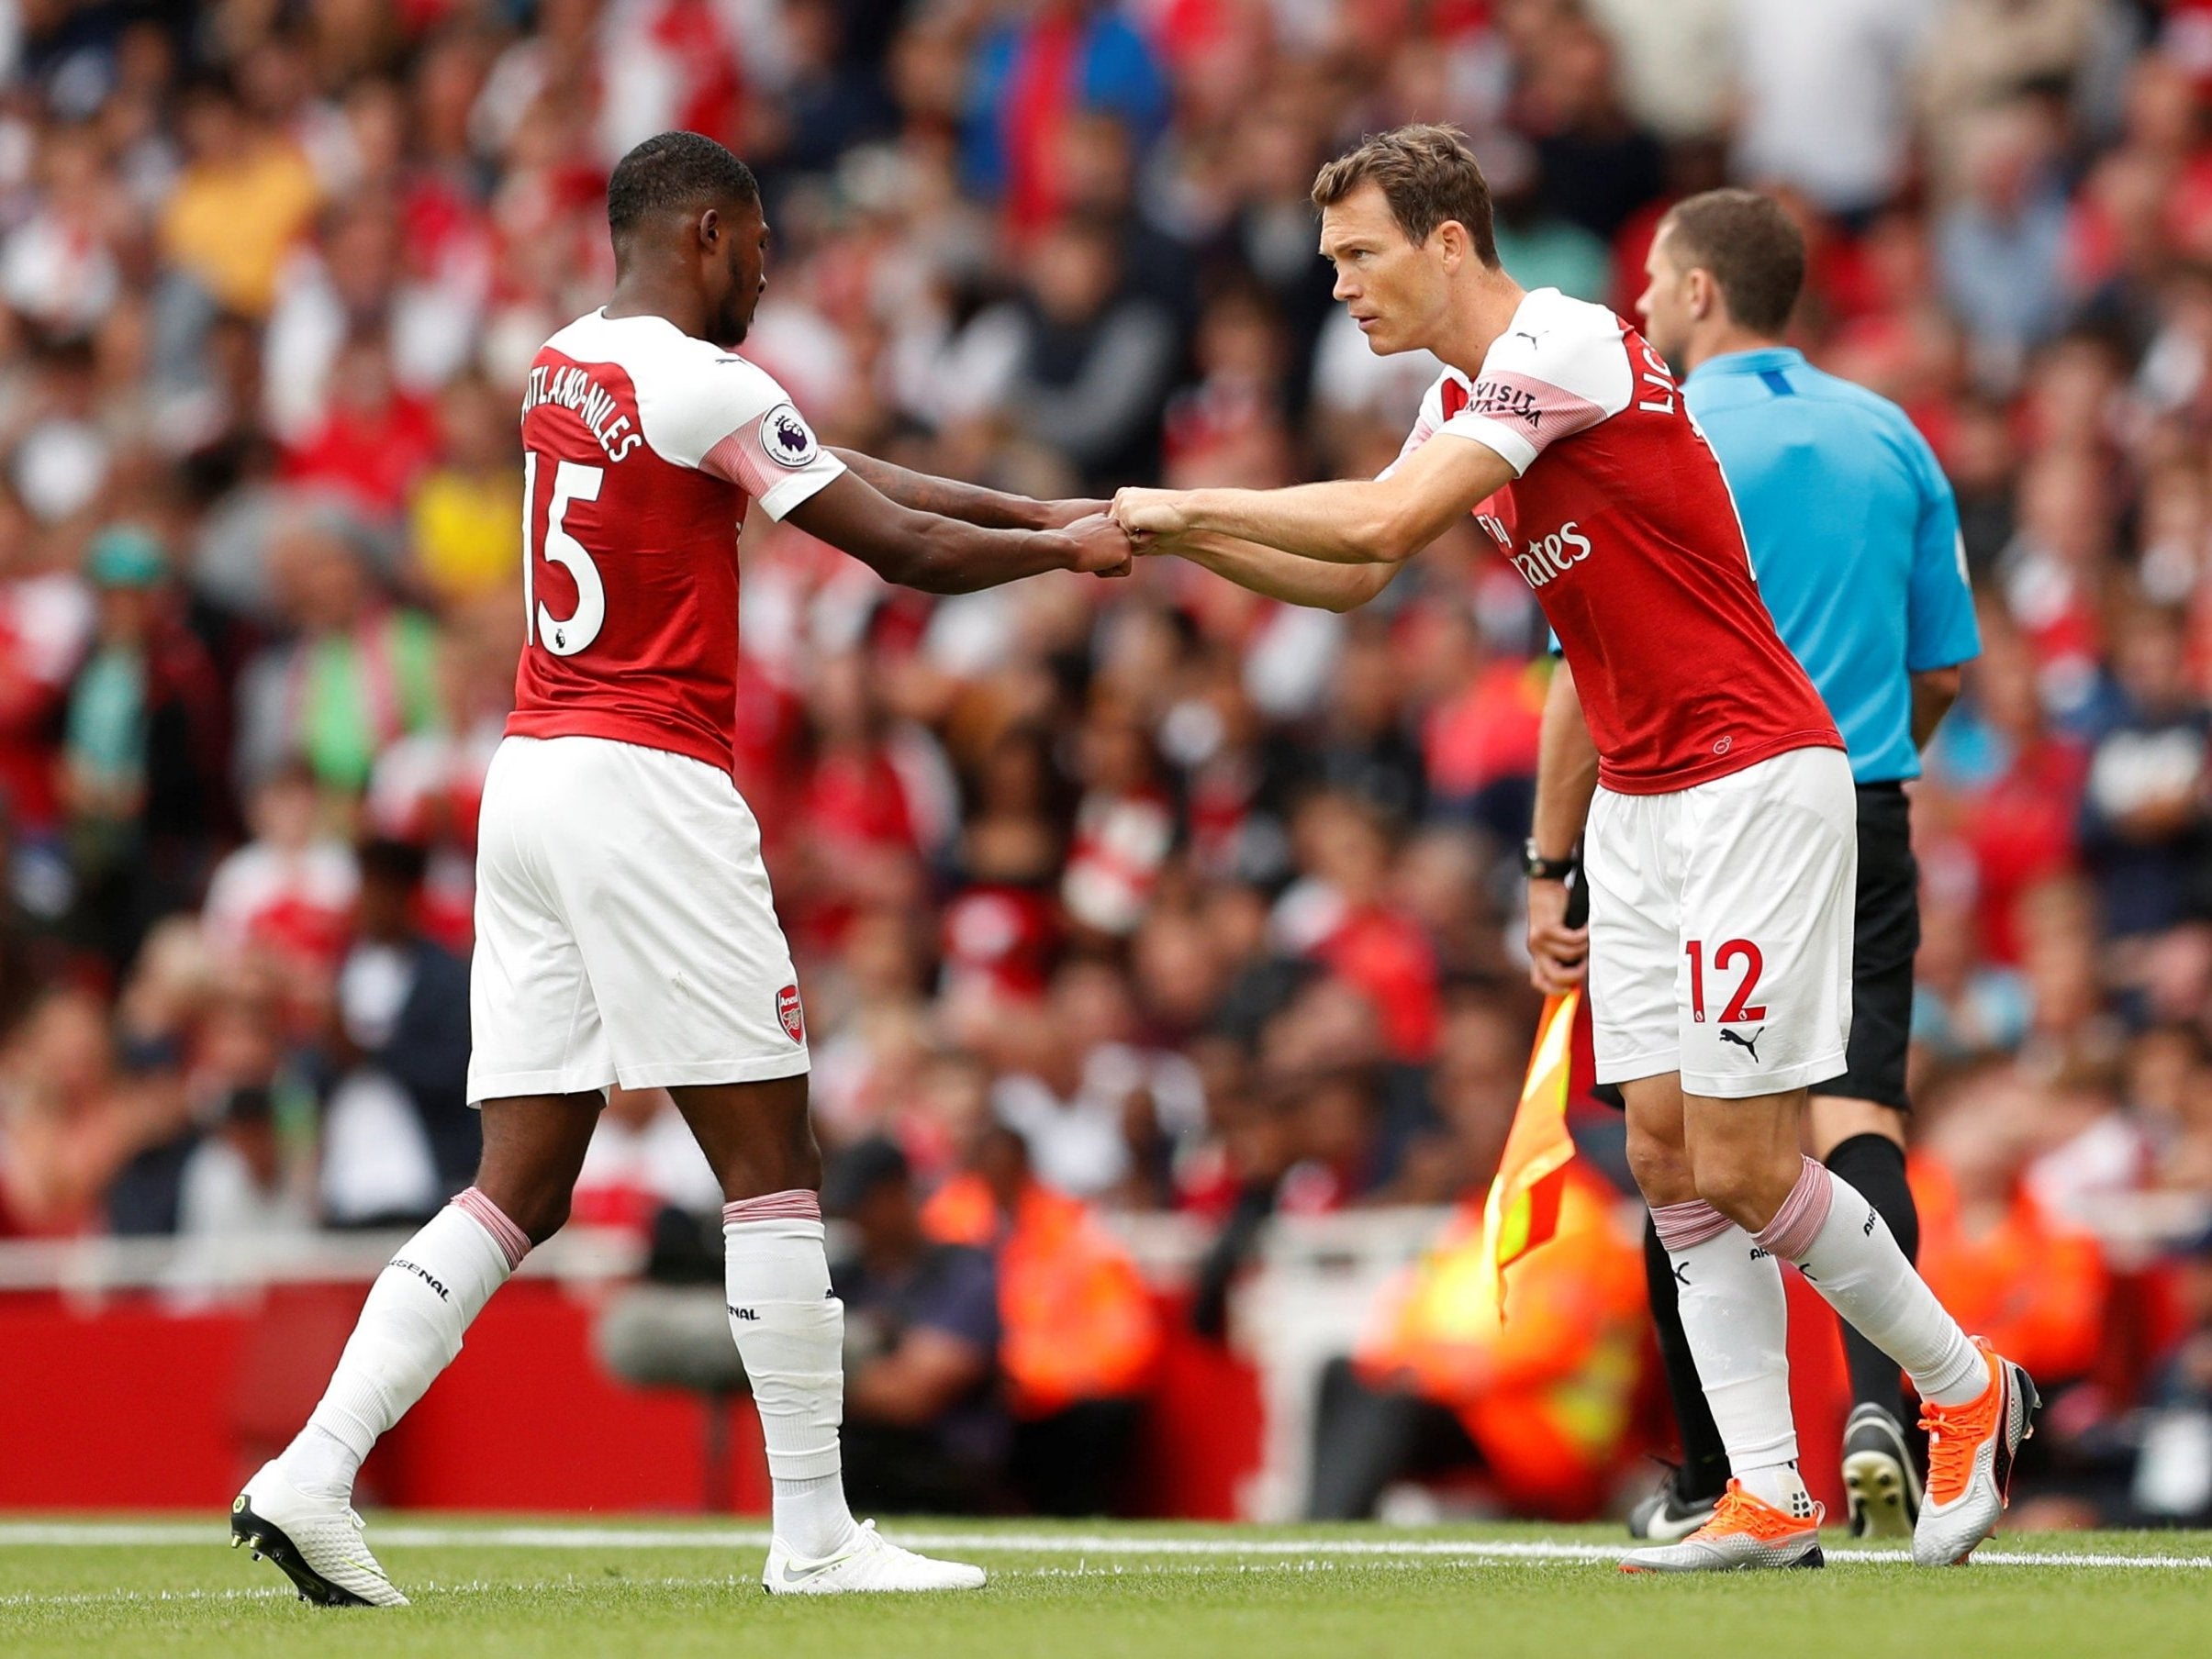 Stephan Lichtsteiner could replace the injured Ainsley Maitland-Niles at left-back